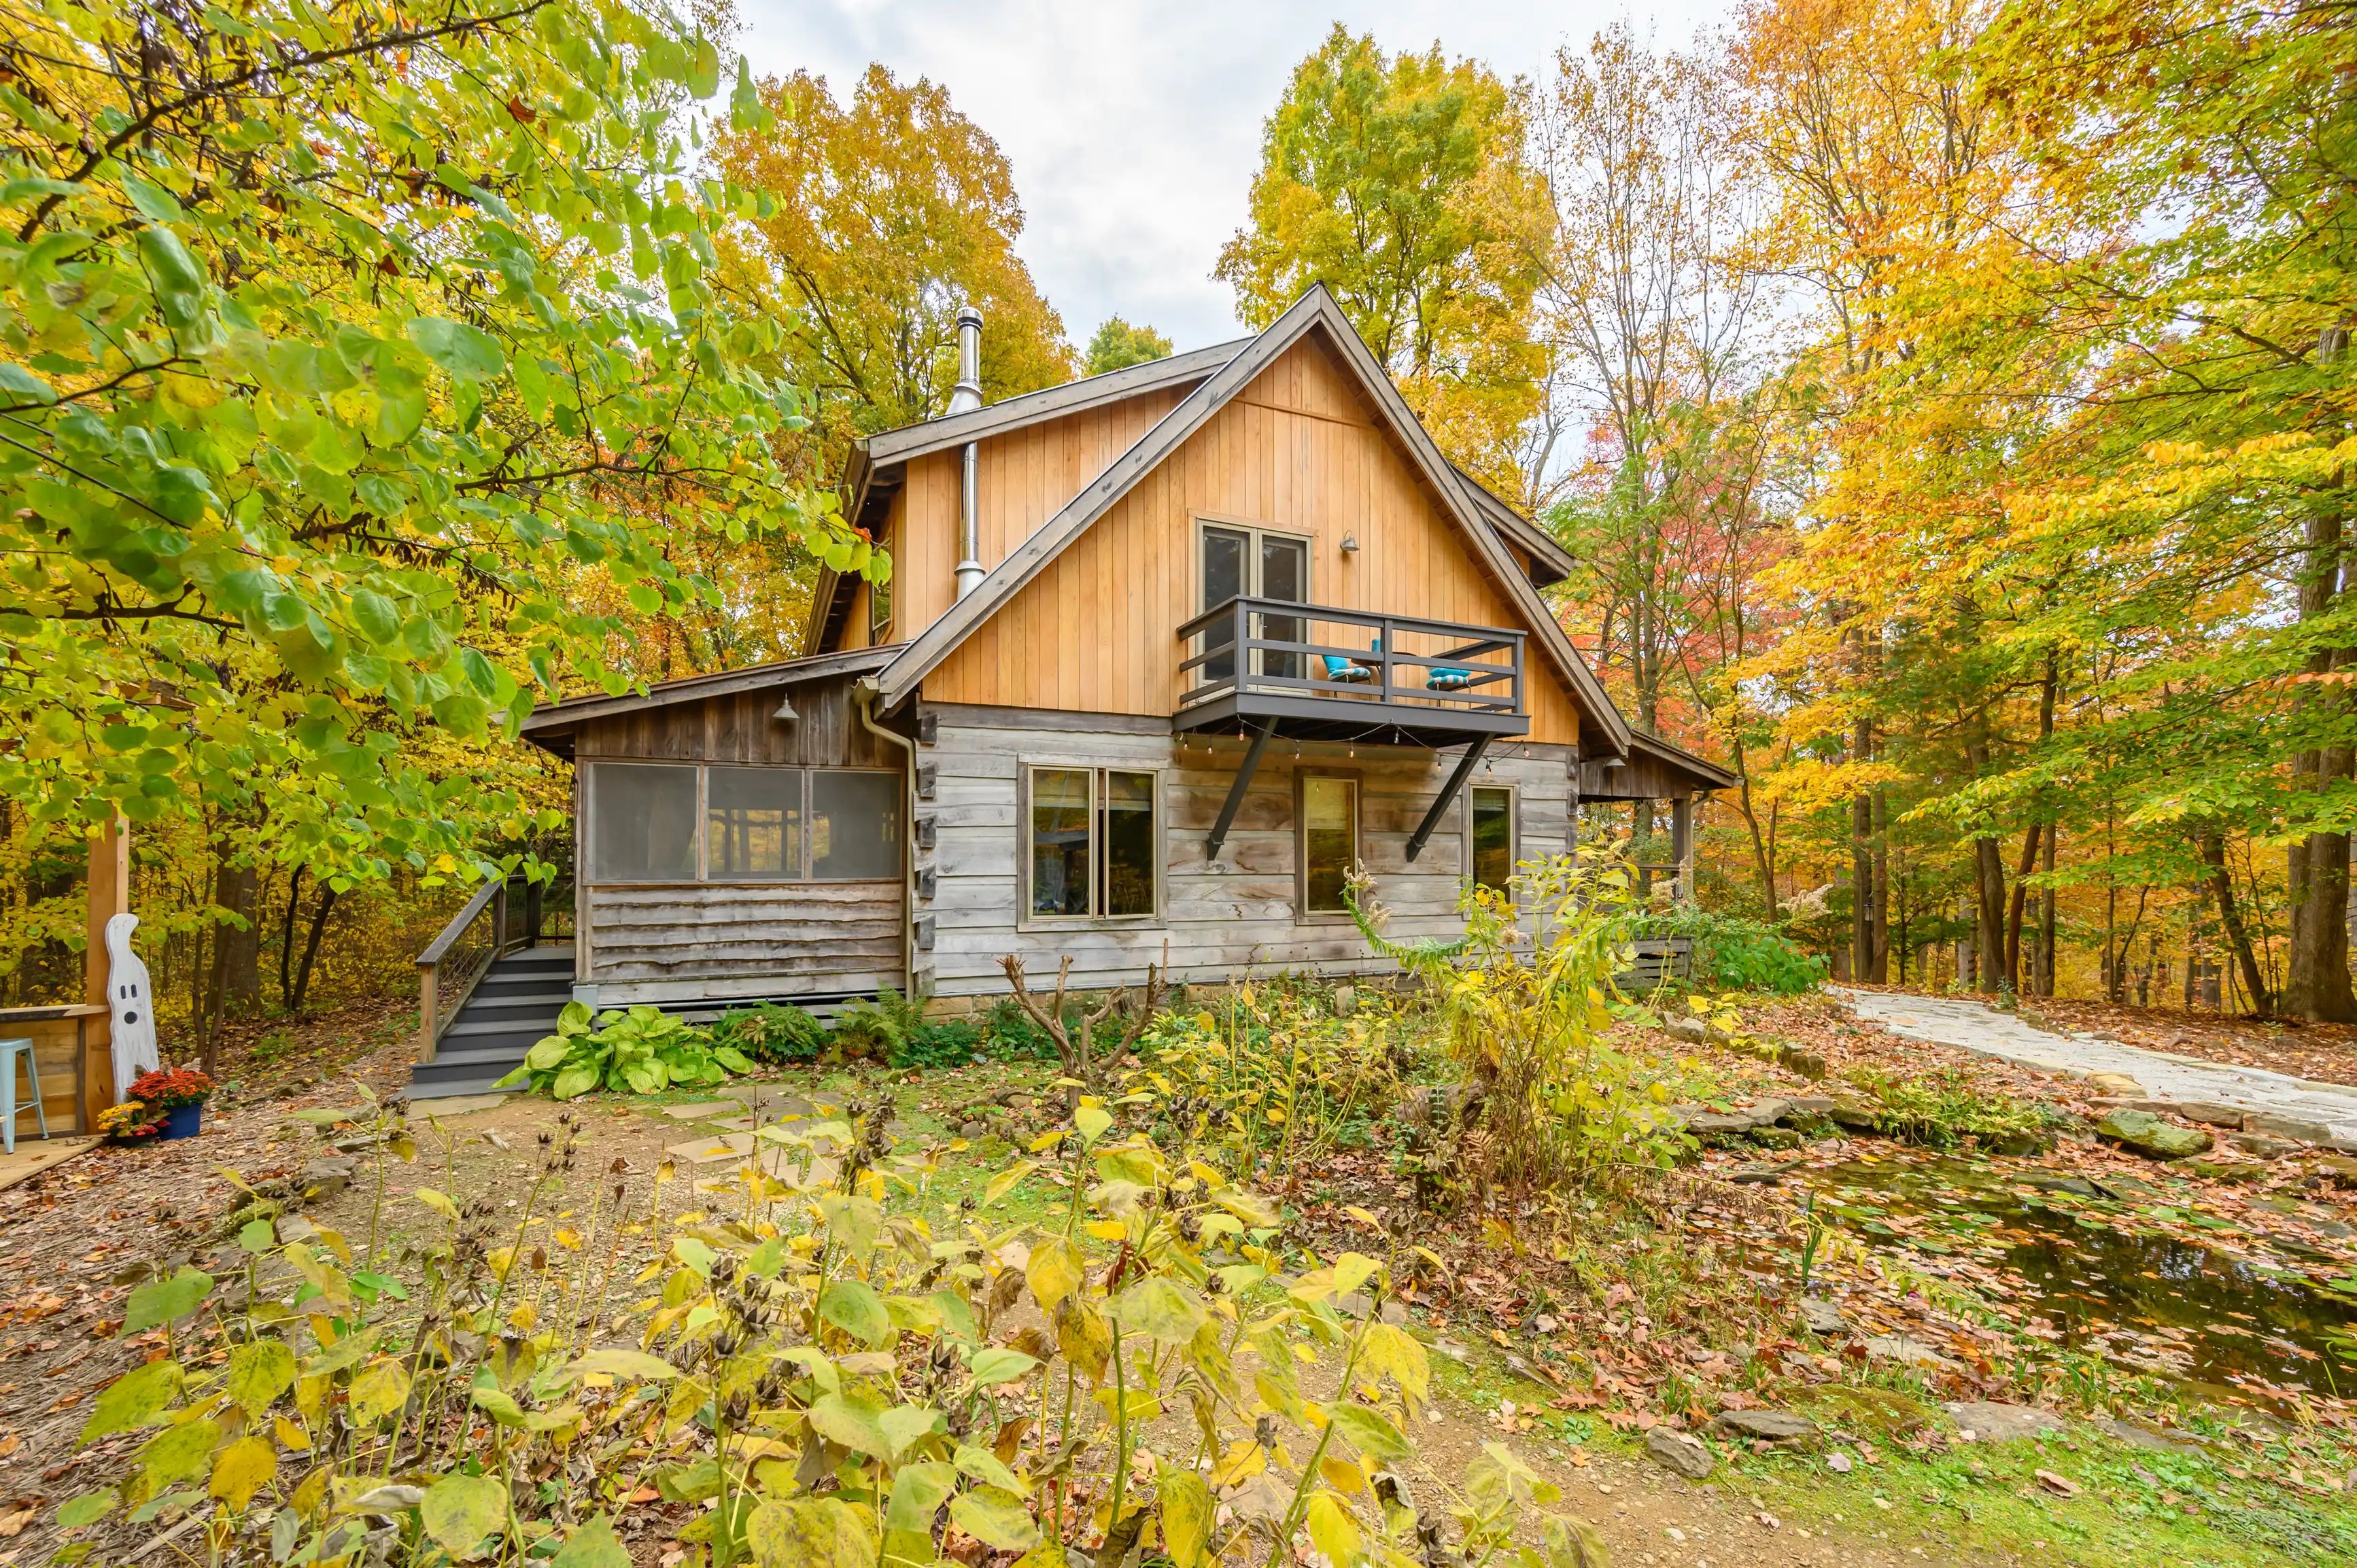 A cozy wooden cabin surrounded by autumn-colored trees with a balcony and a pond in the forefront.